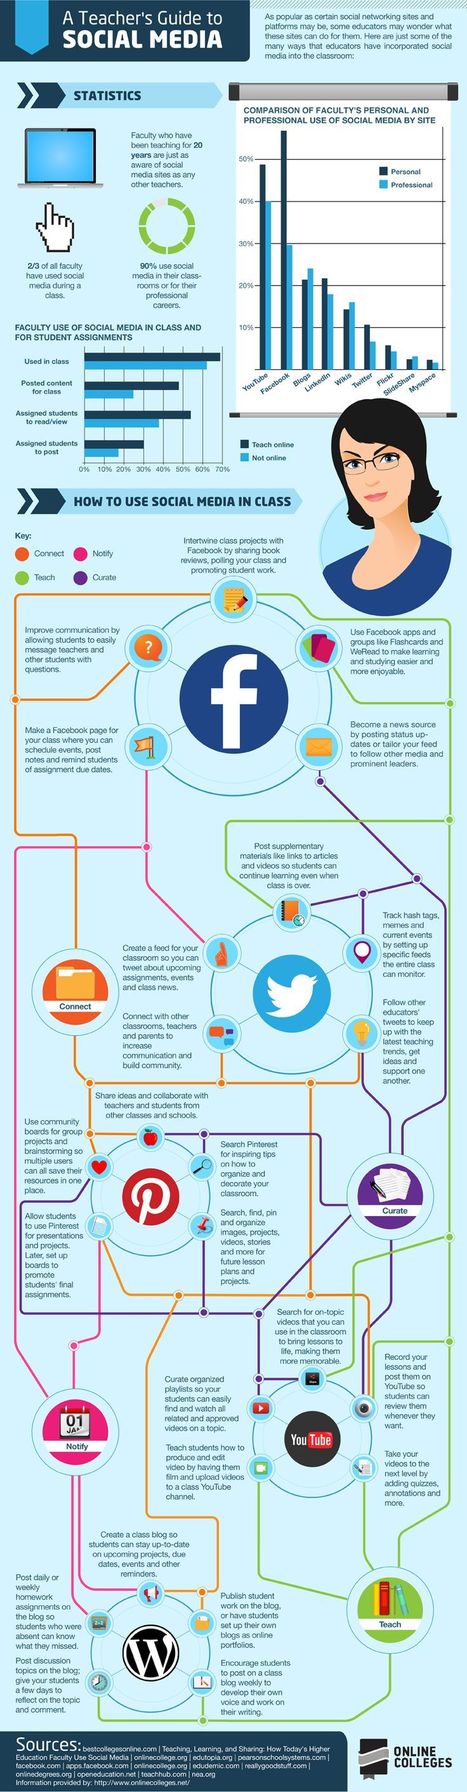 The essential teacher's guide to social media - Daily Genius | Social Media for Higher Education | Scoop.it